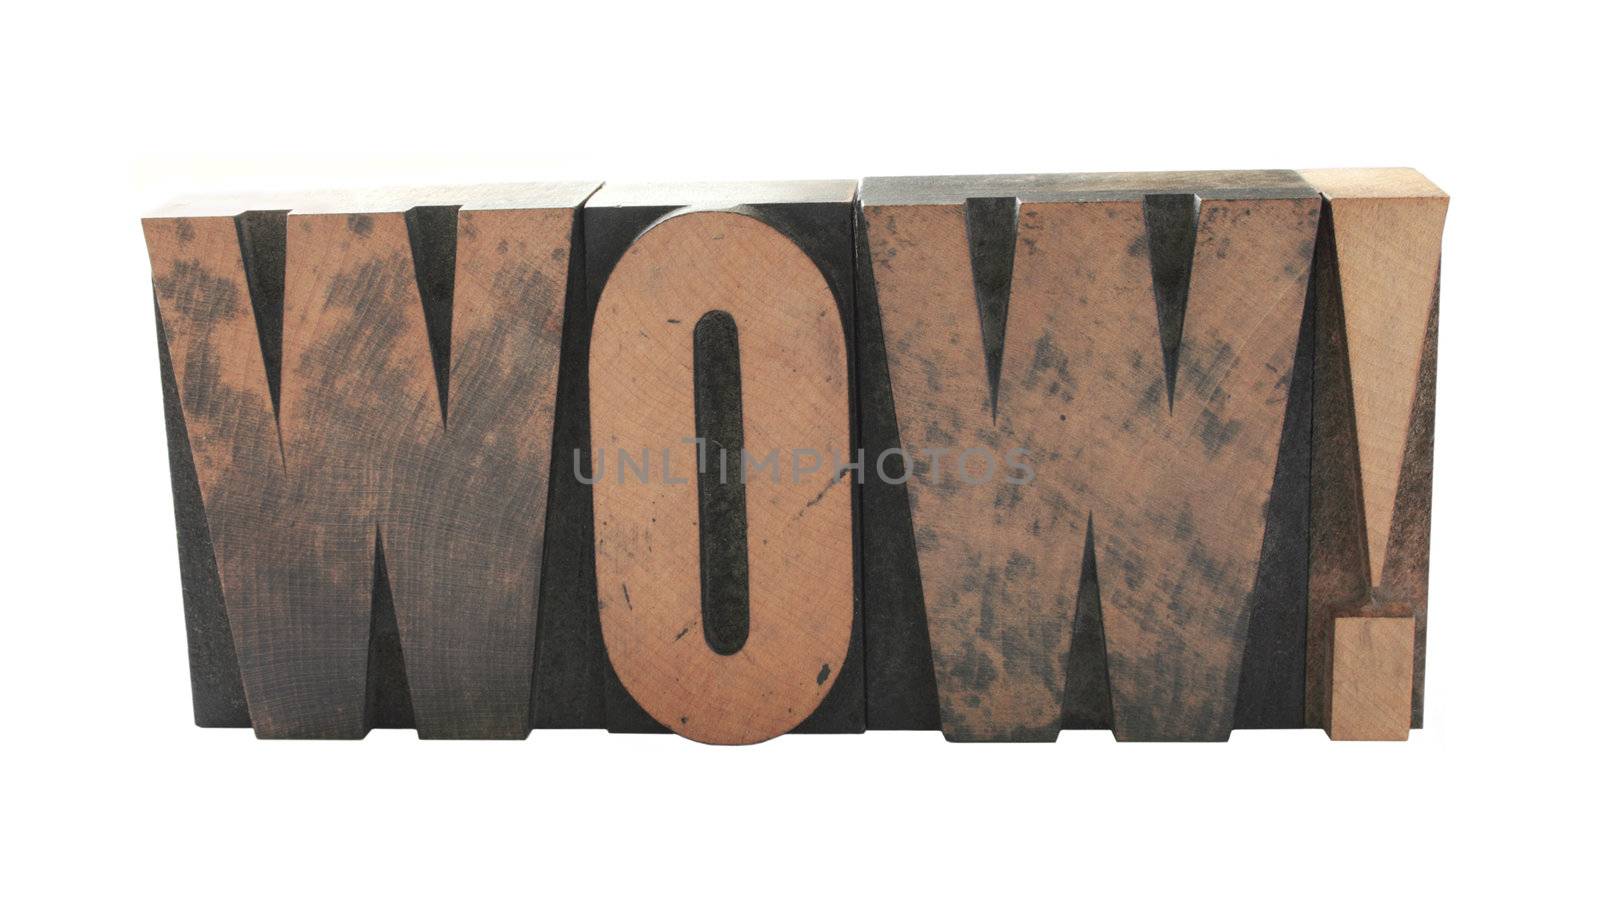 the word 'wow' in old wood type letters